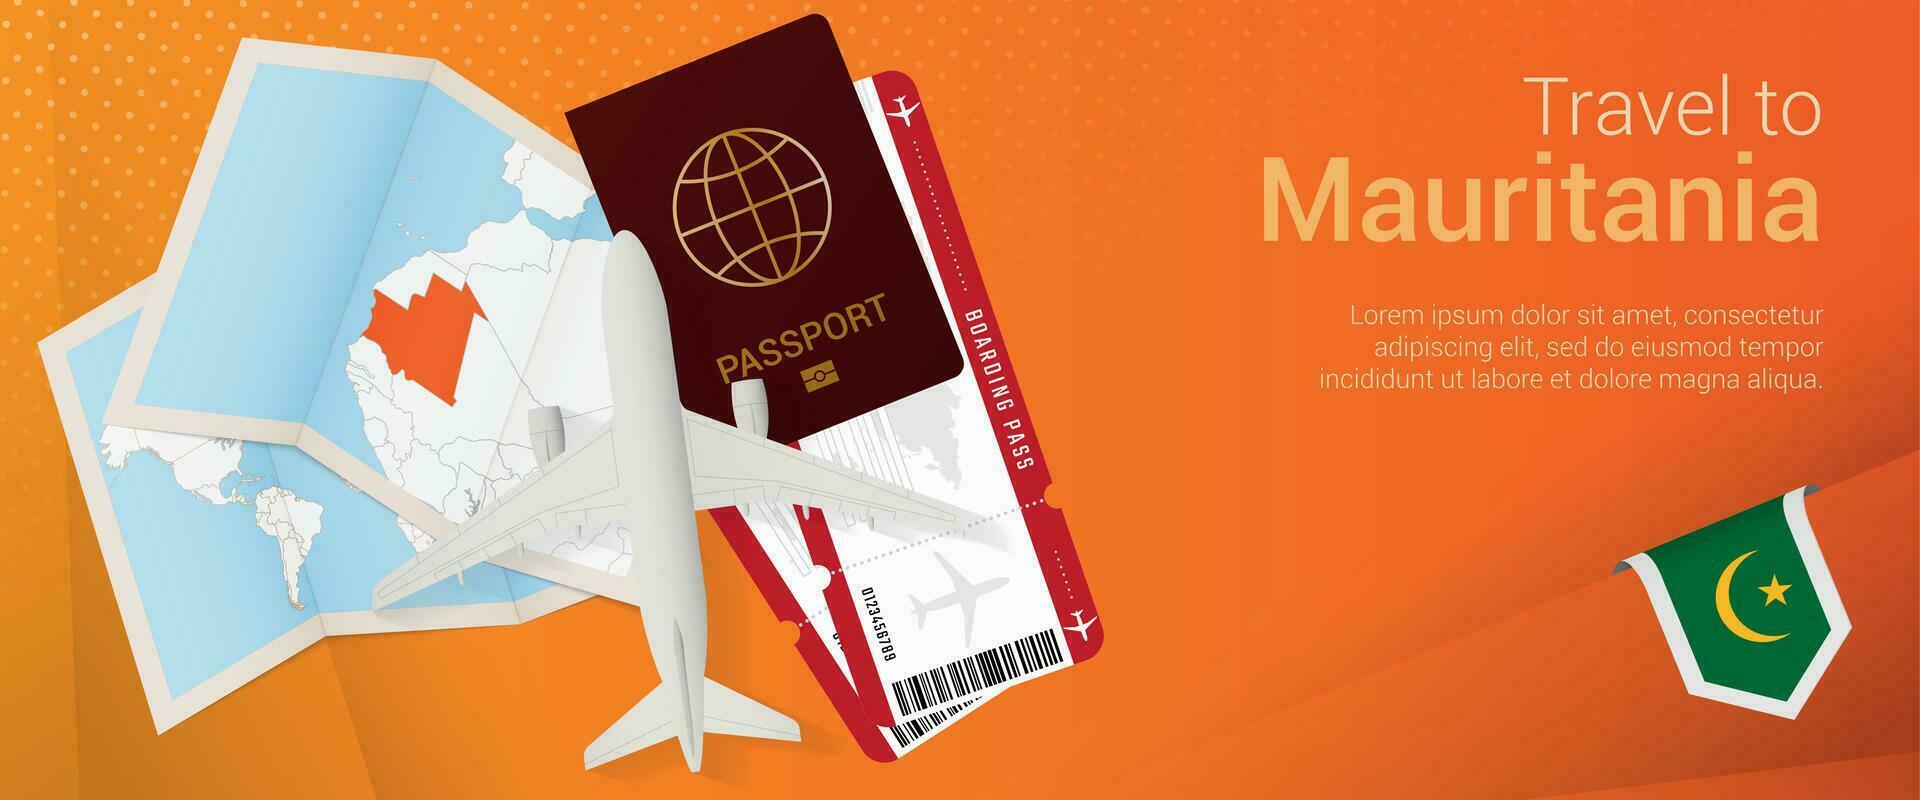 Travel to Mauritania pop-under banner. Trip banner with passport, tickets, airplane, boarding pass, map and flag of Mauritania. vector